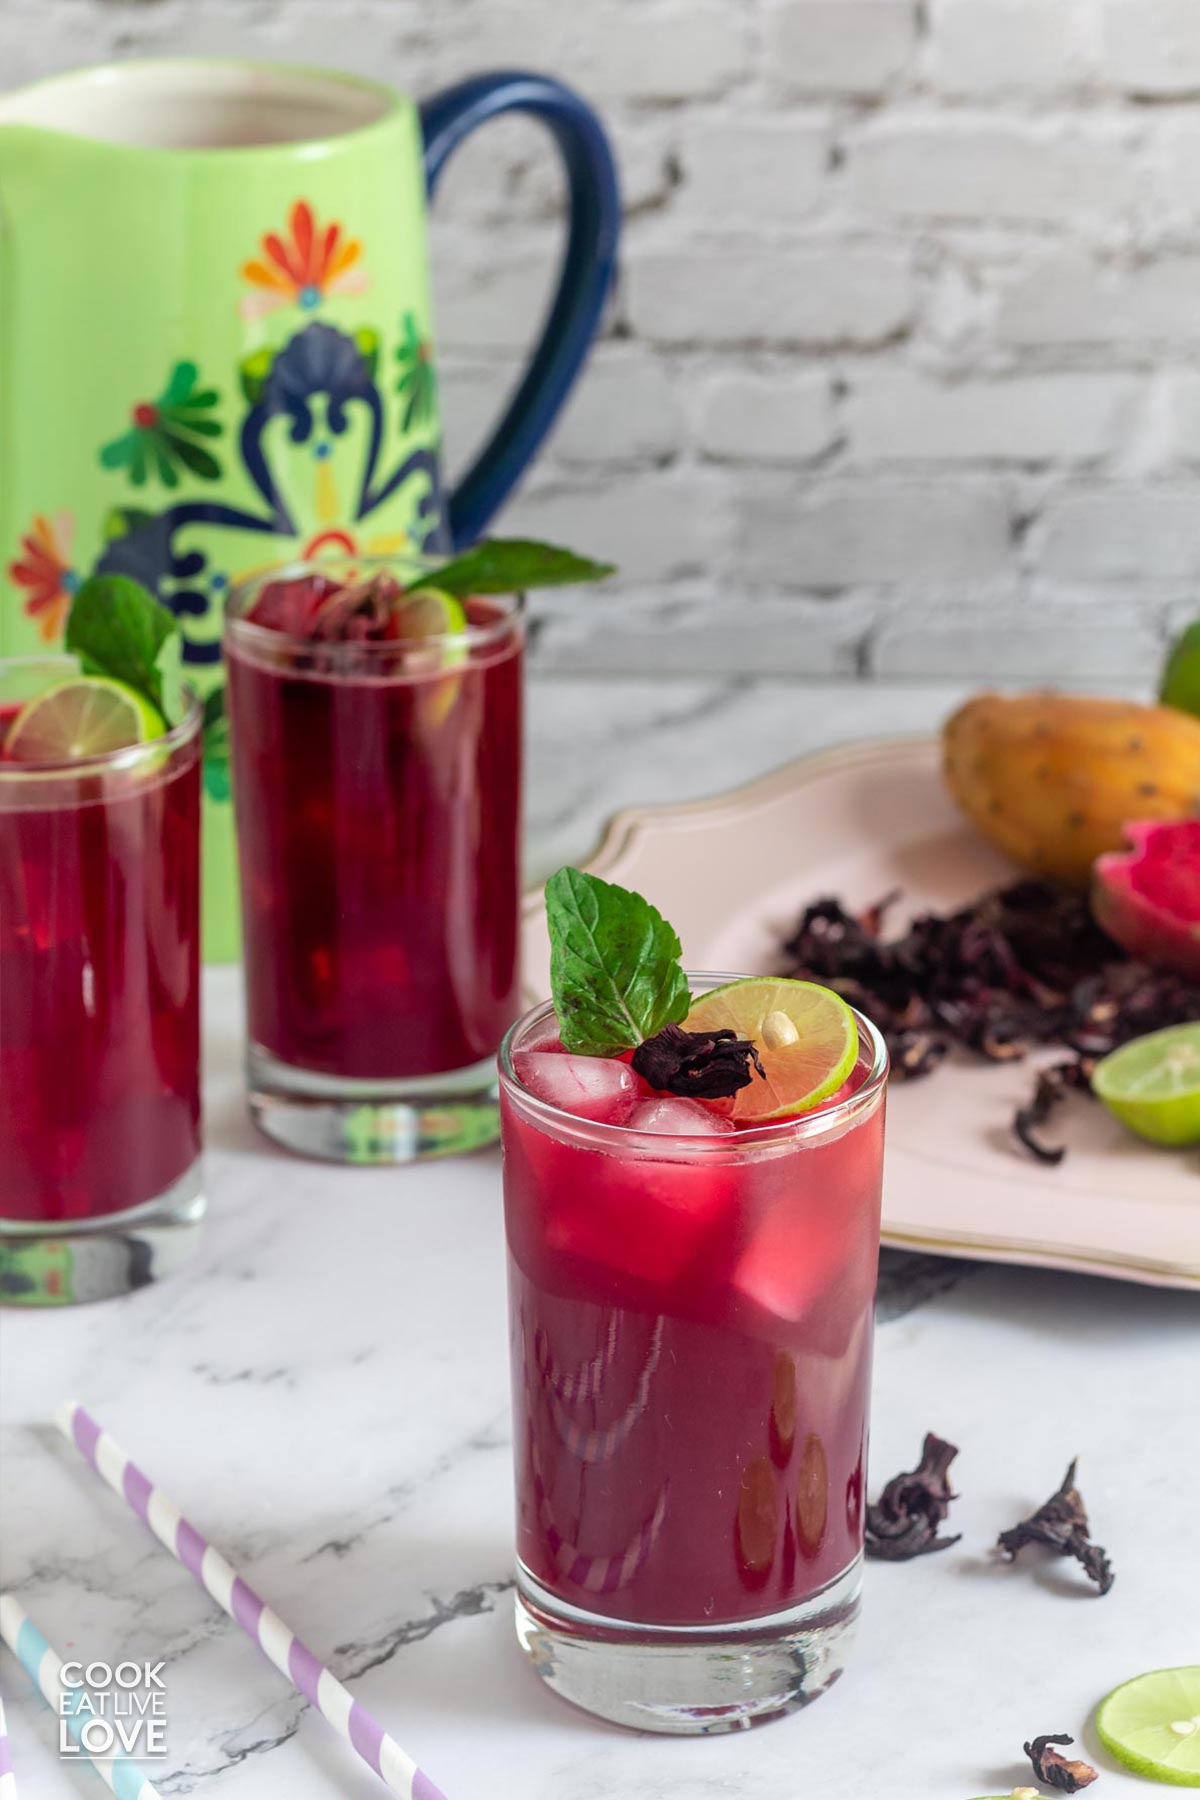 Glasses of prickly pear agua fresca on the table with a platter of whole and halved fruit.